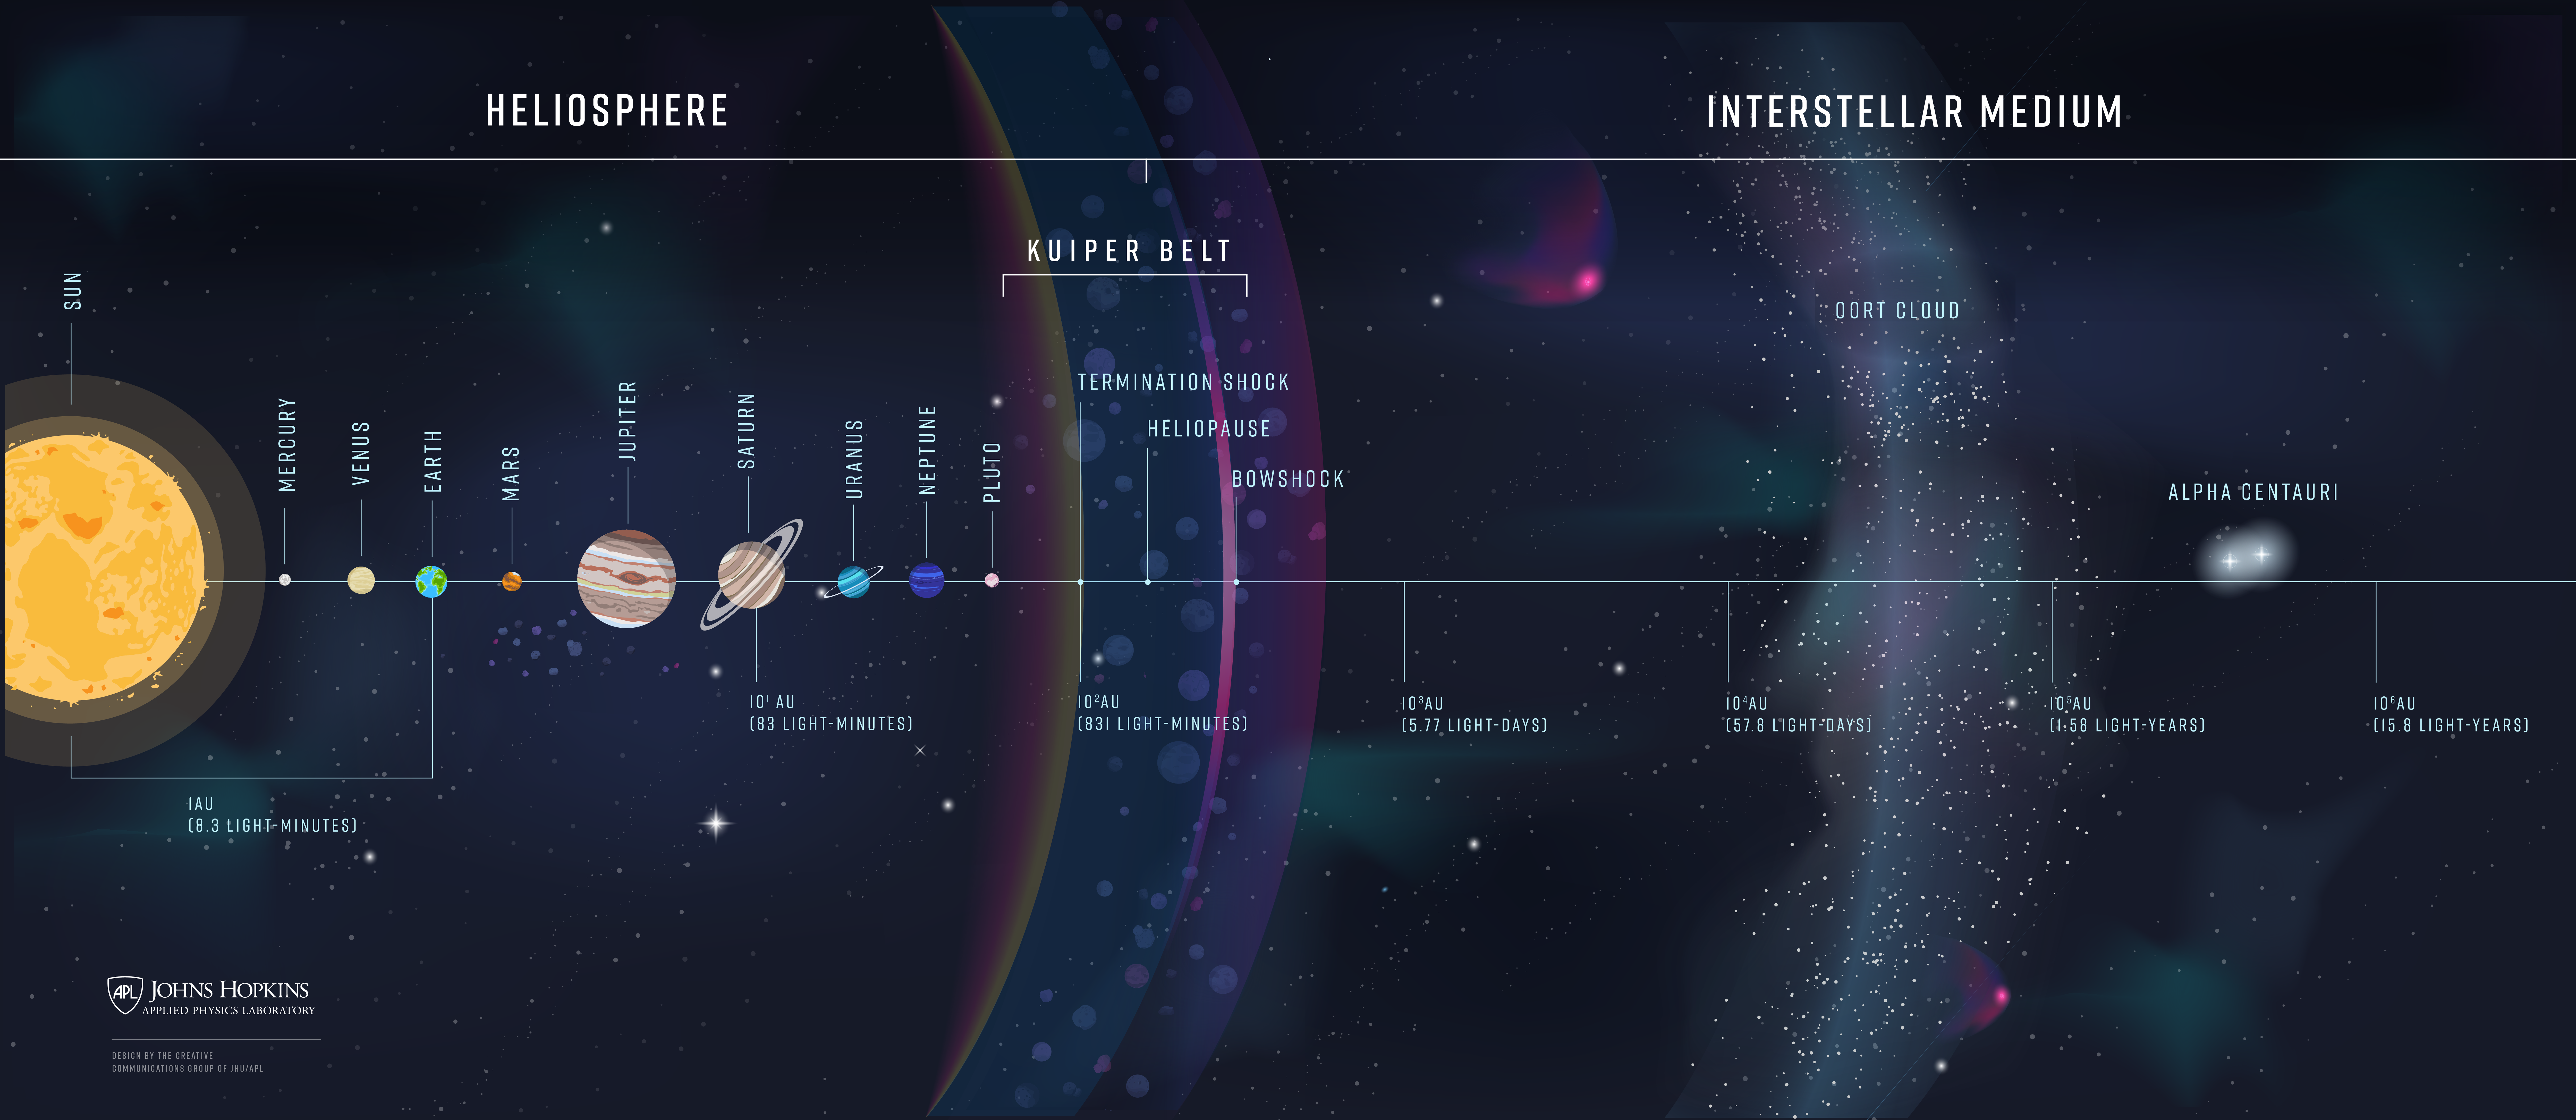 The Interstellar Probe is a decades-old mission to reach hundreds of astronomical units.